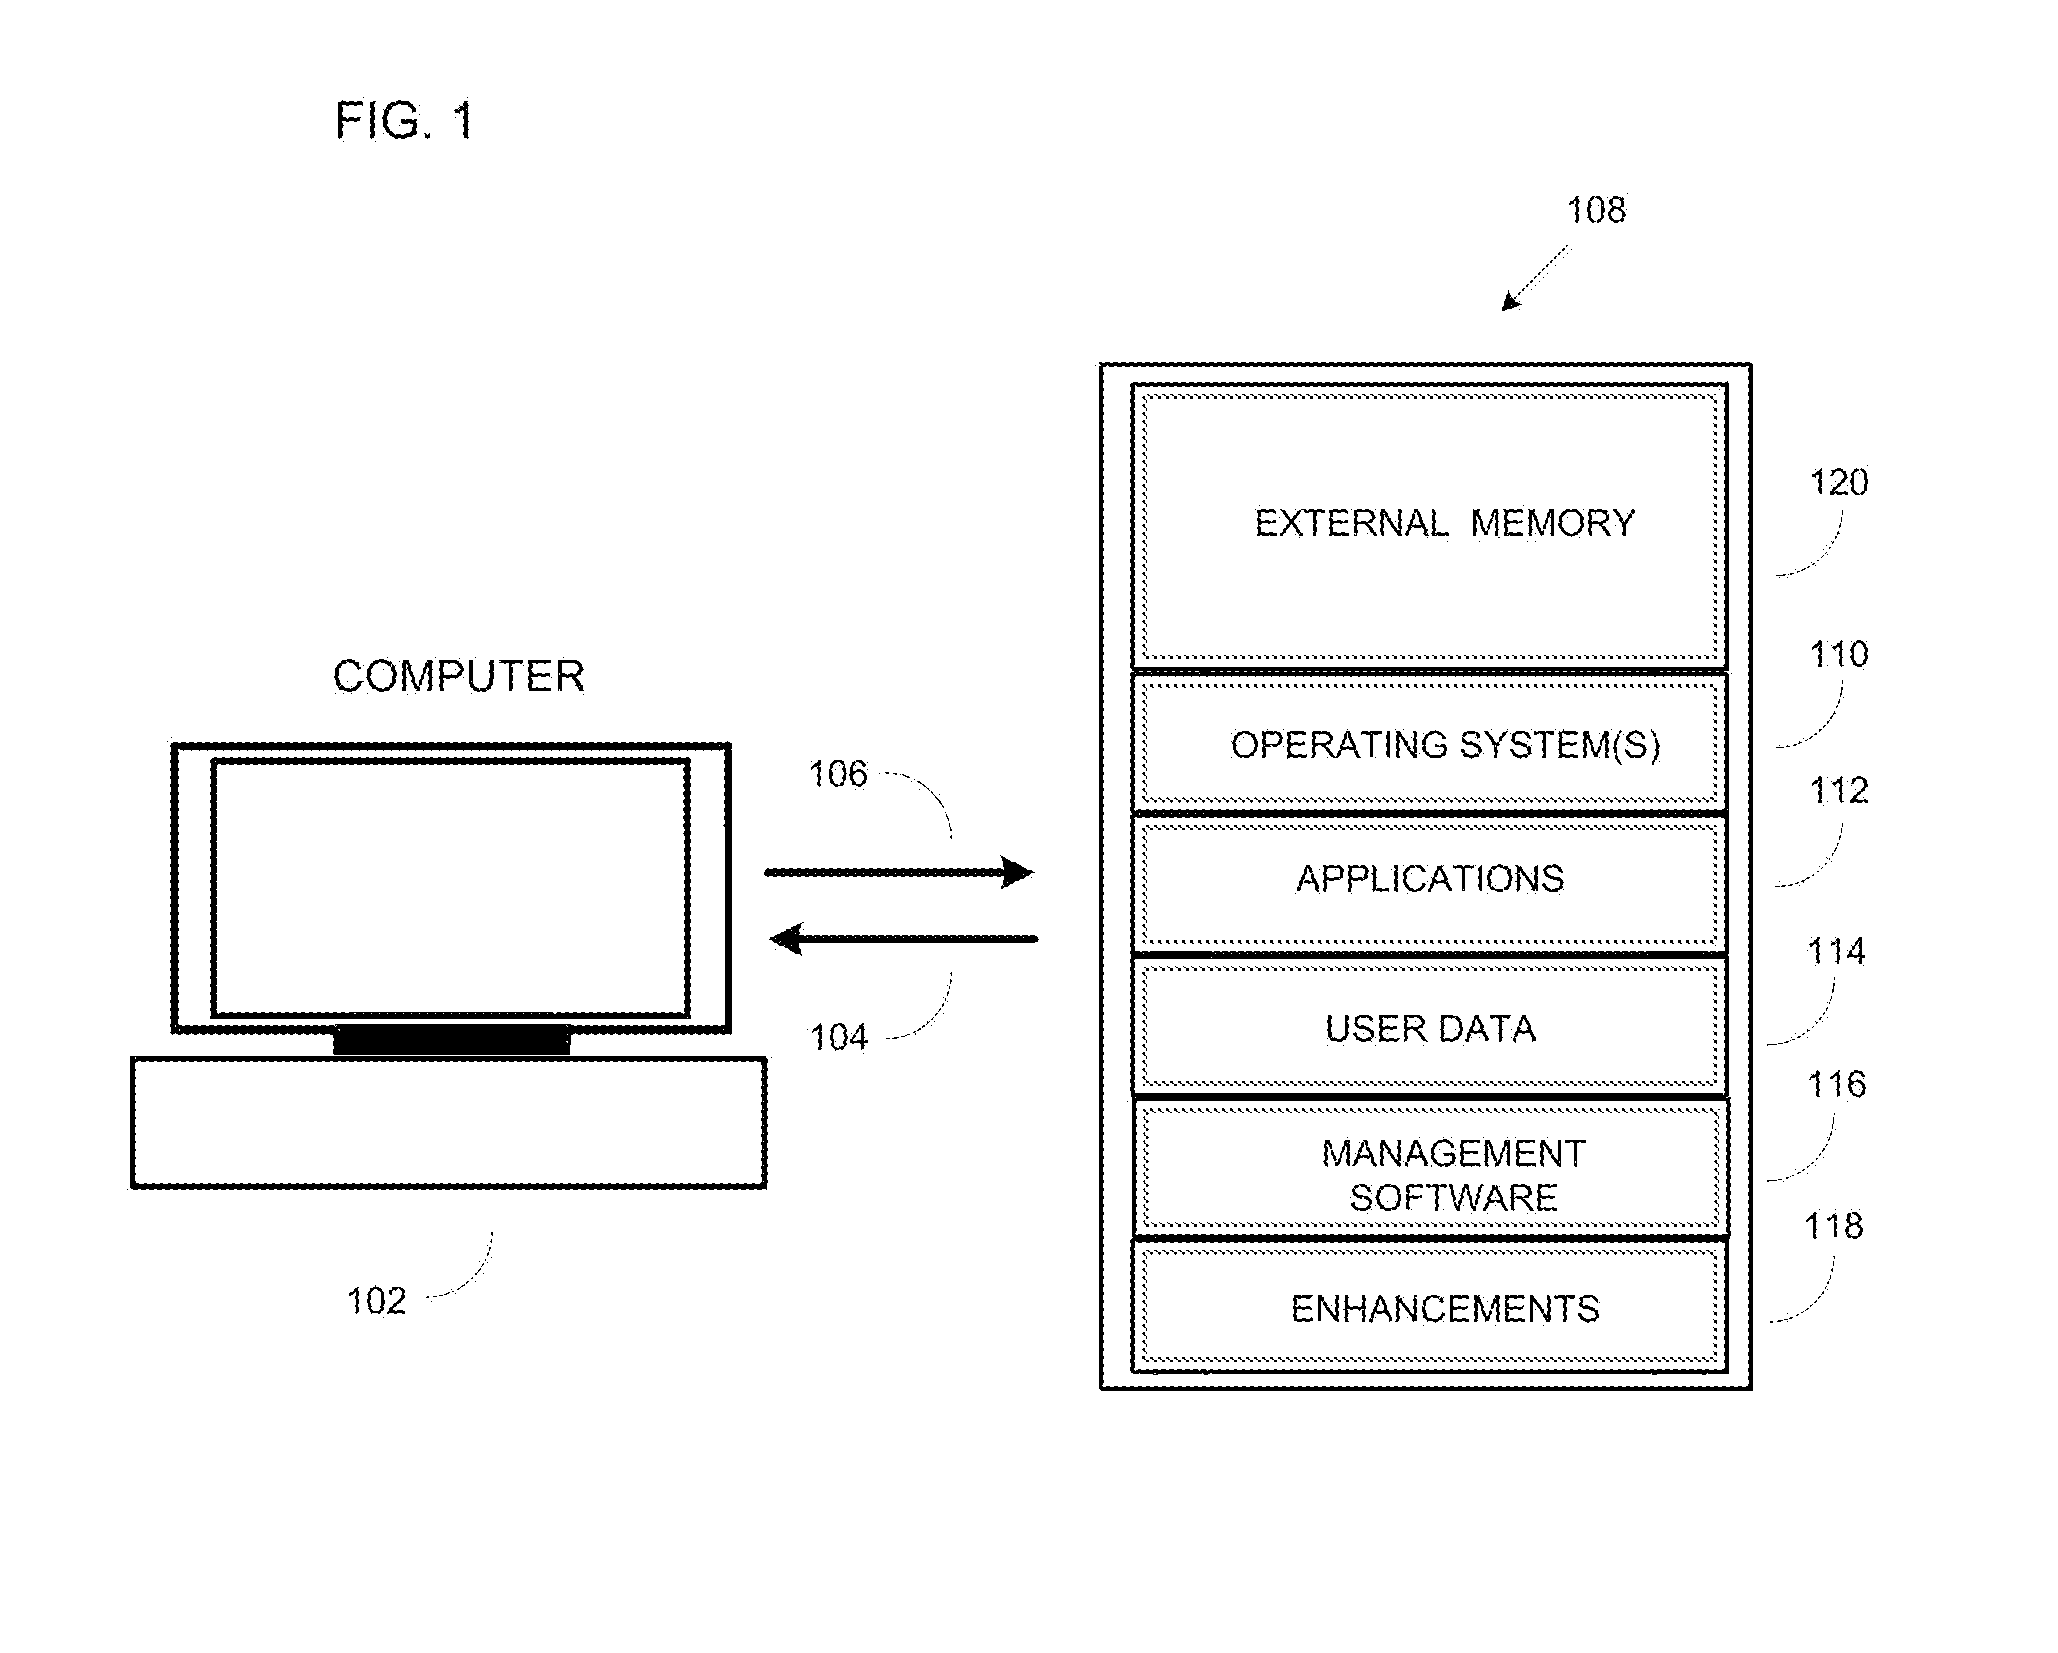 Portable memory drive with portable applications and cross-computer system management application